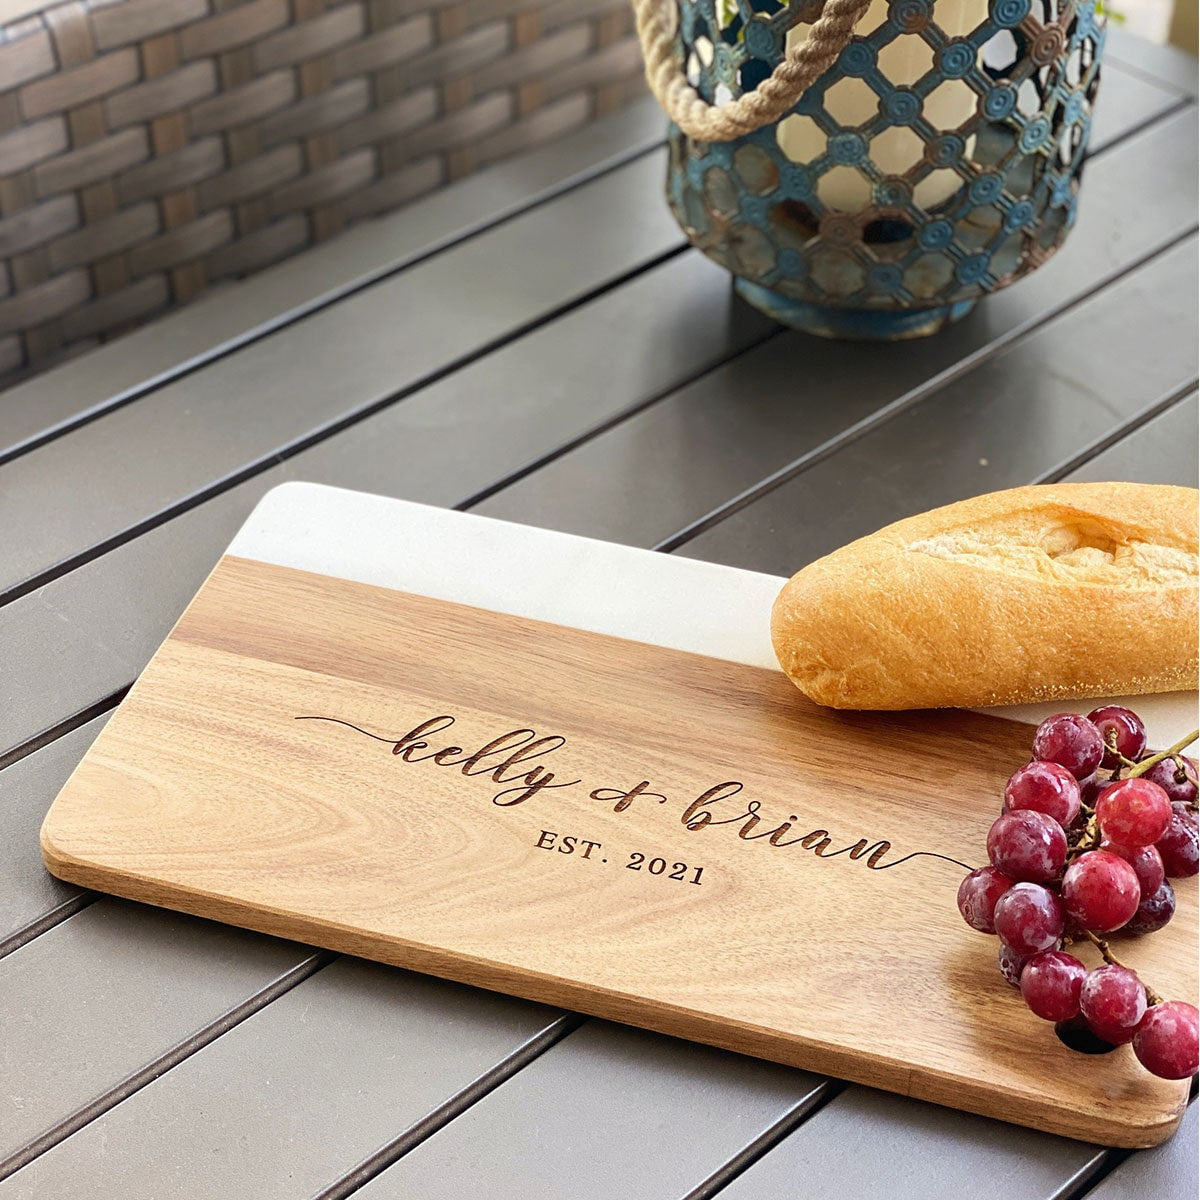 Personalized Marble Wood Cutting Board, Cheese Board, Charcuterie Board, Anniversary Gift, Wedding Gift, Housewarming Gift, Serving Board